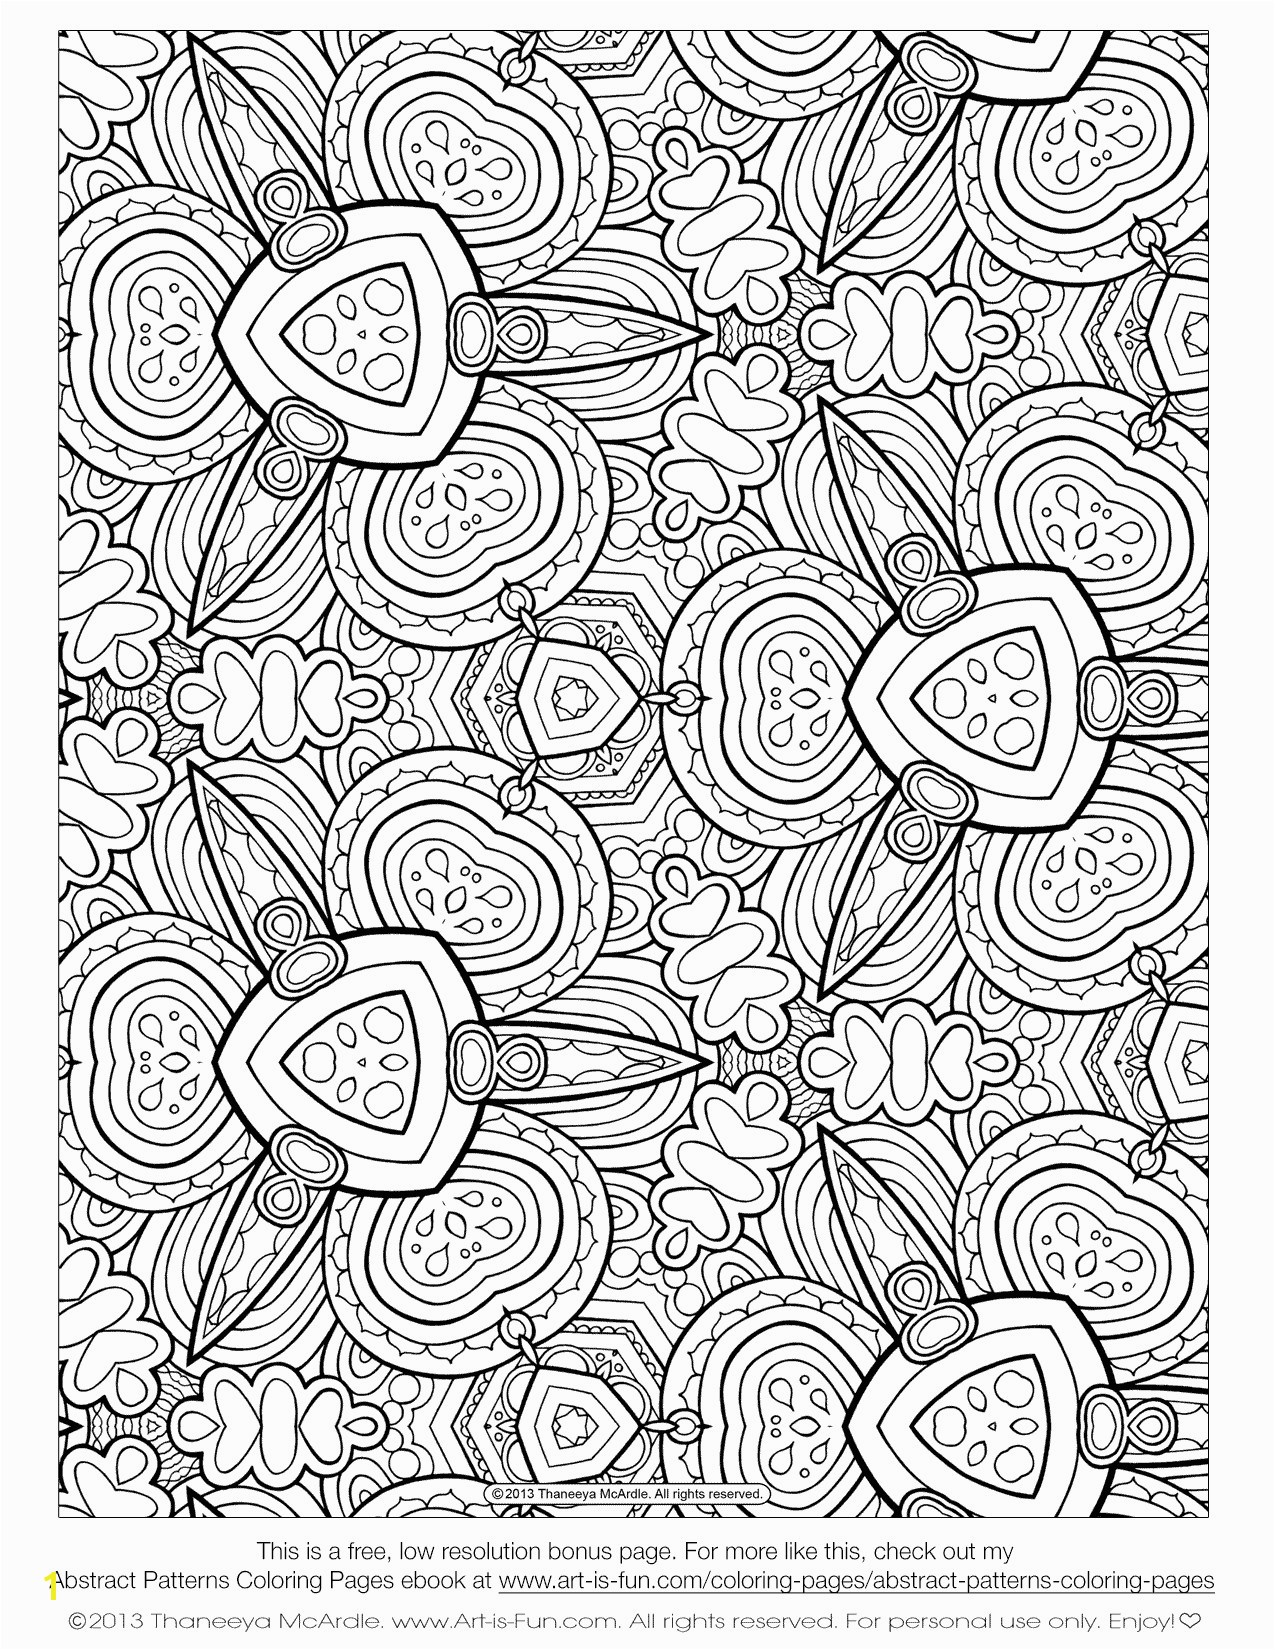 Free Printable Coloring Pages for Adults ly Unique Awesome Coloring Page for Adult Od Kids Simple